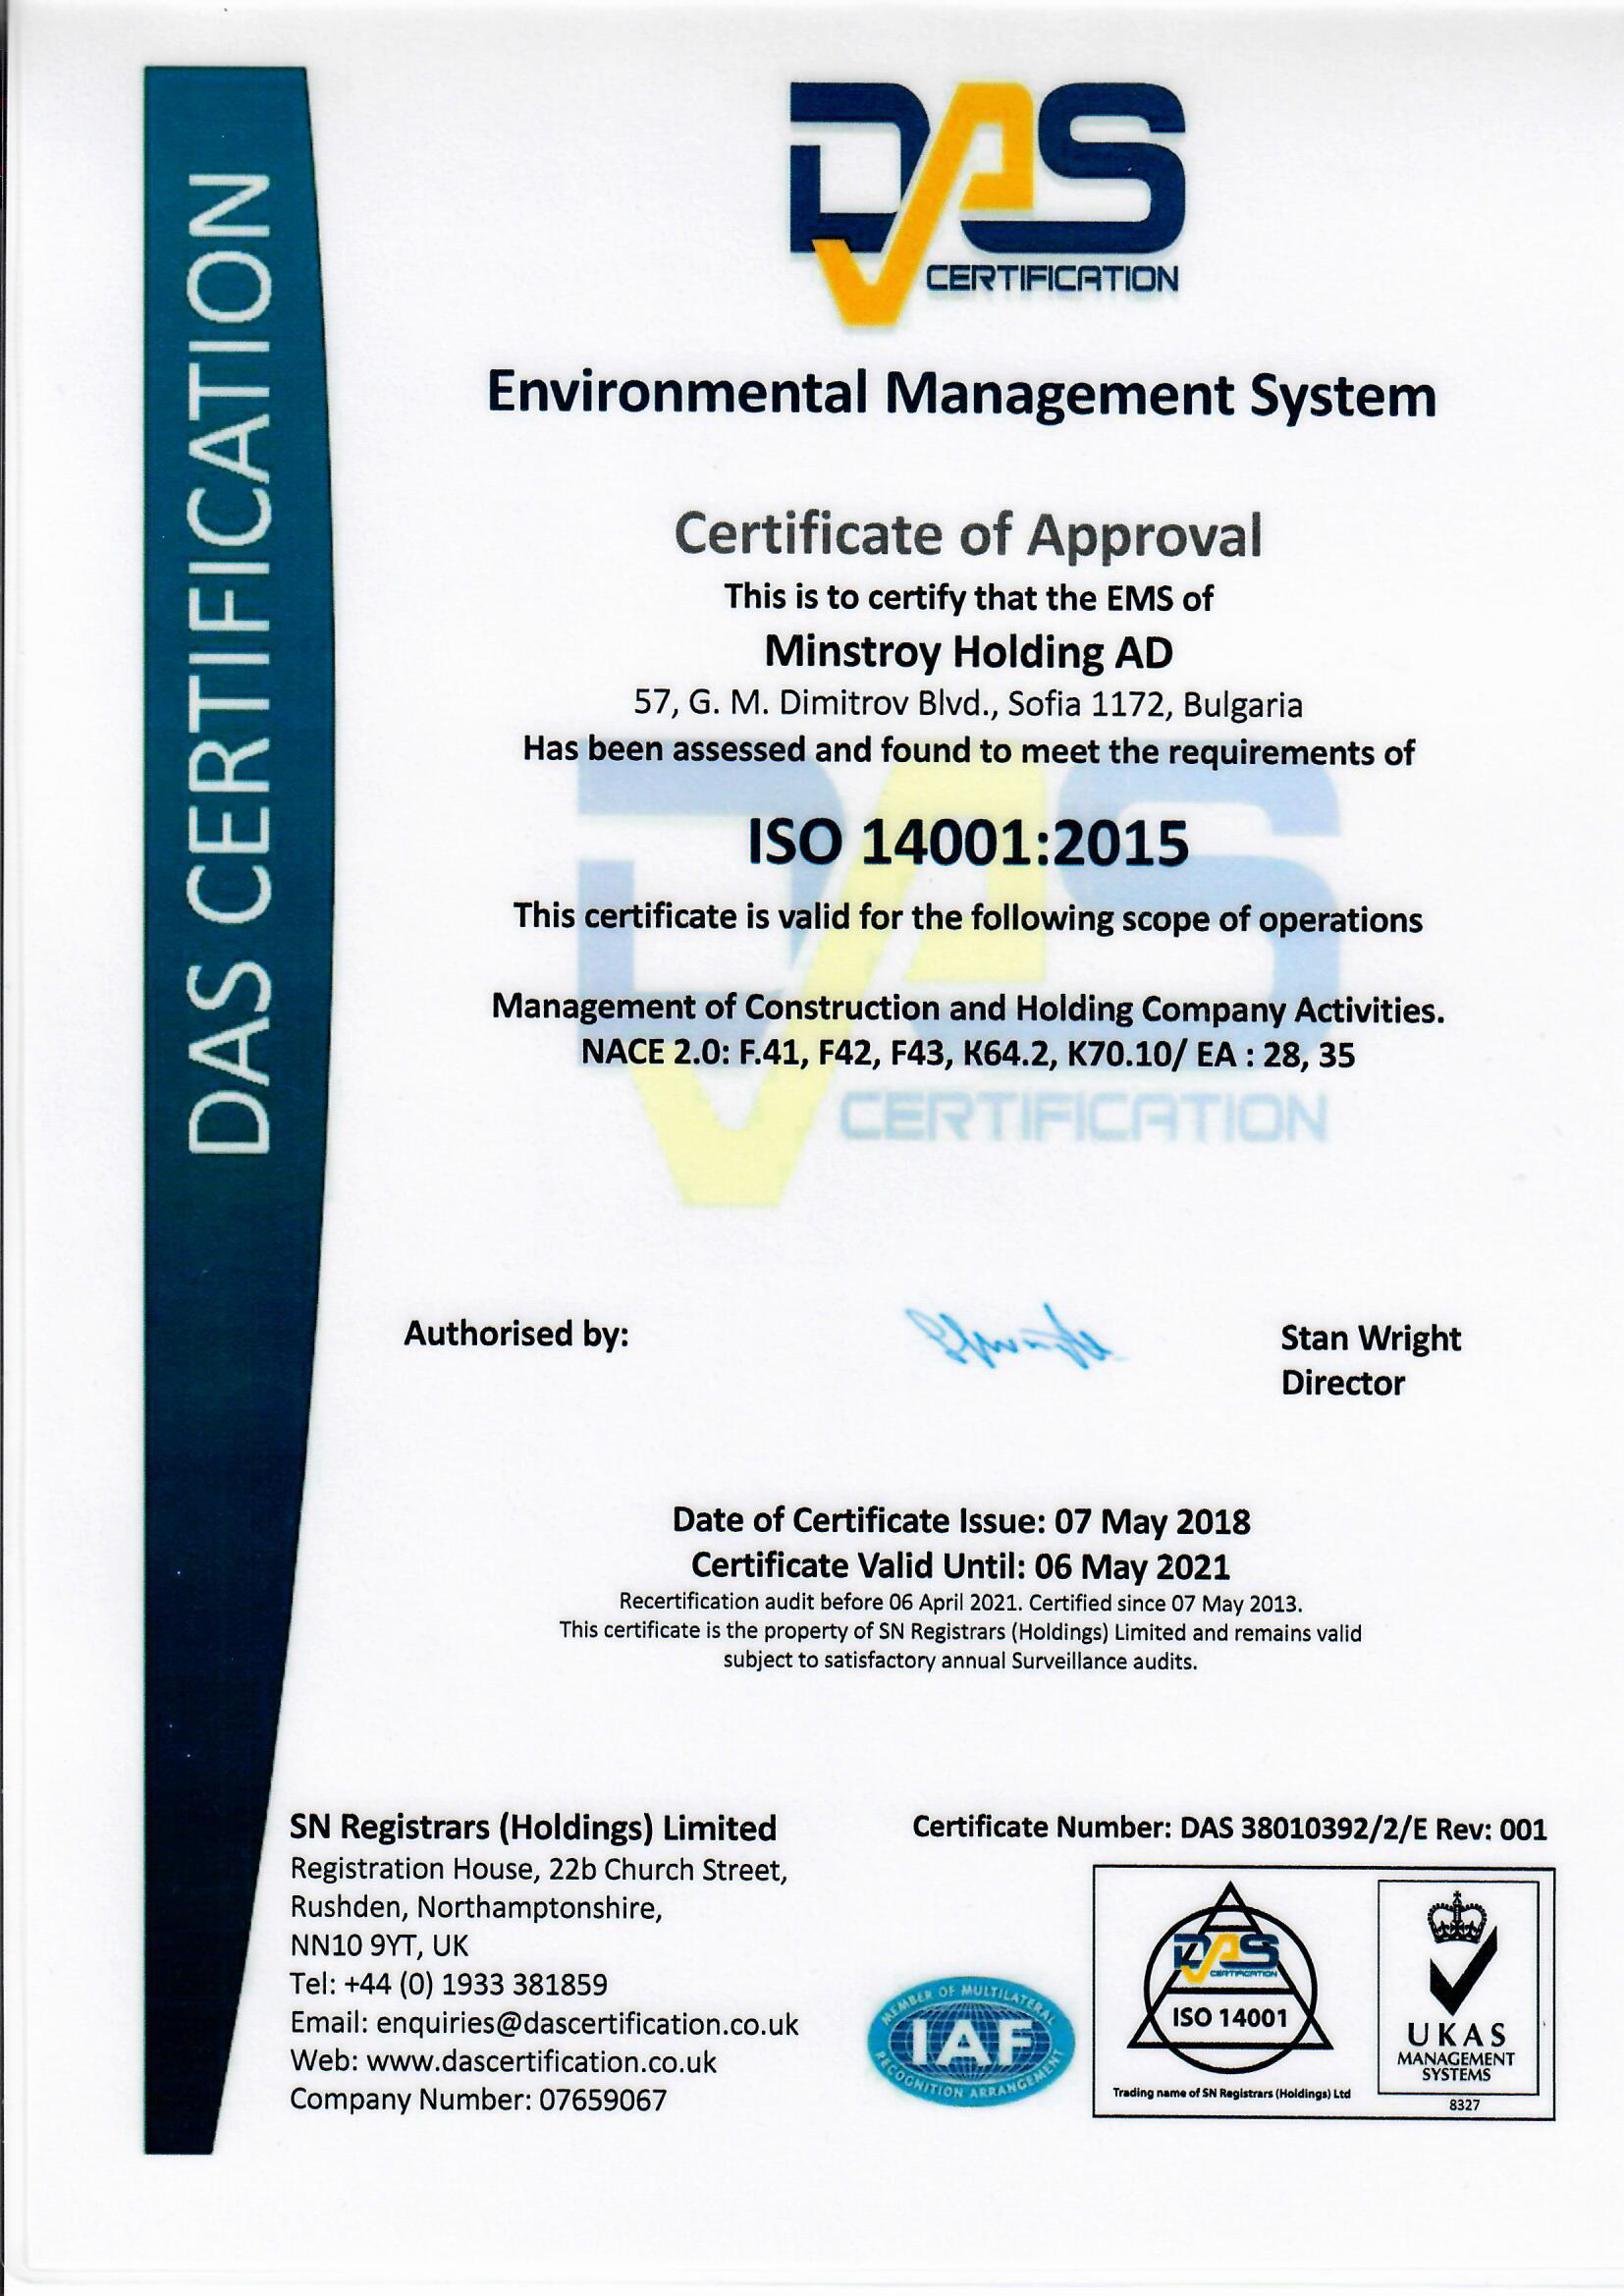 Environmental Management, according to ISO 14001:2015;